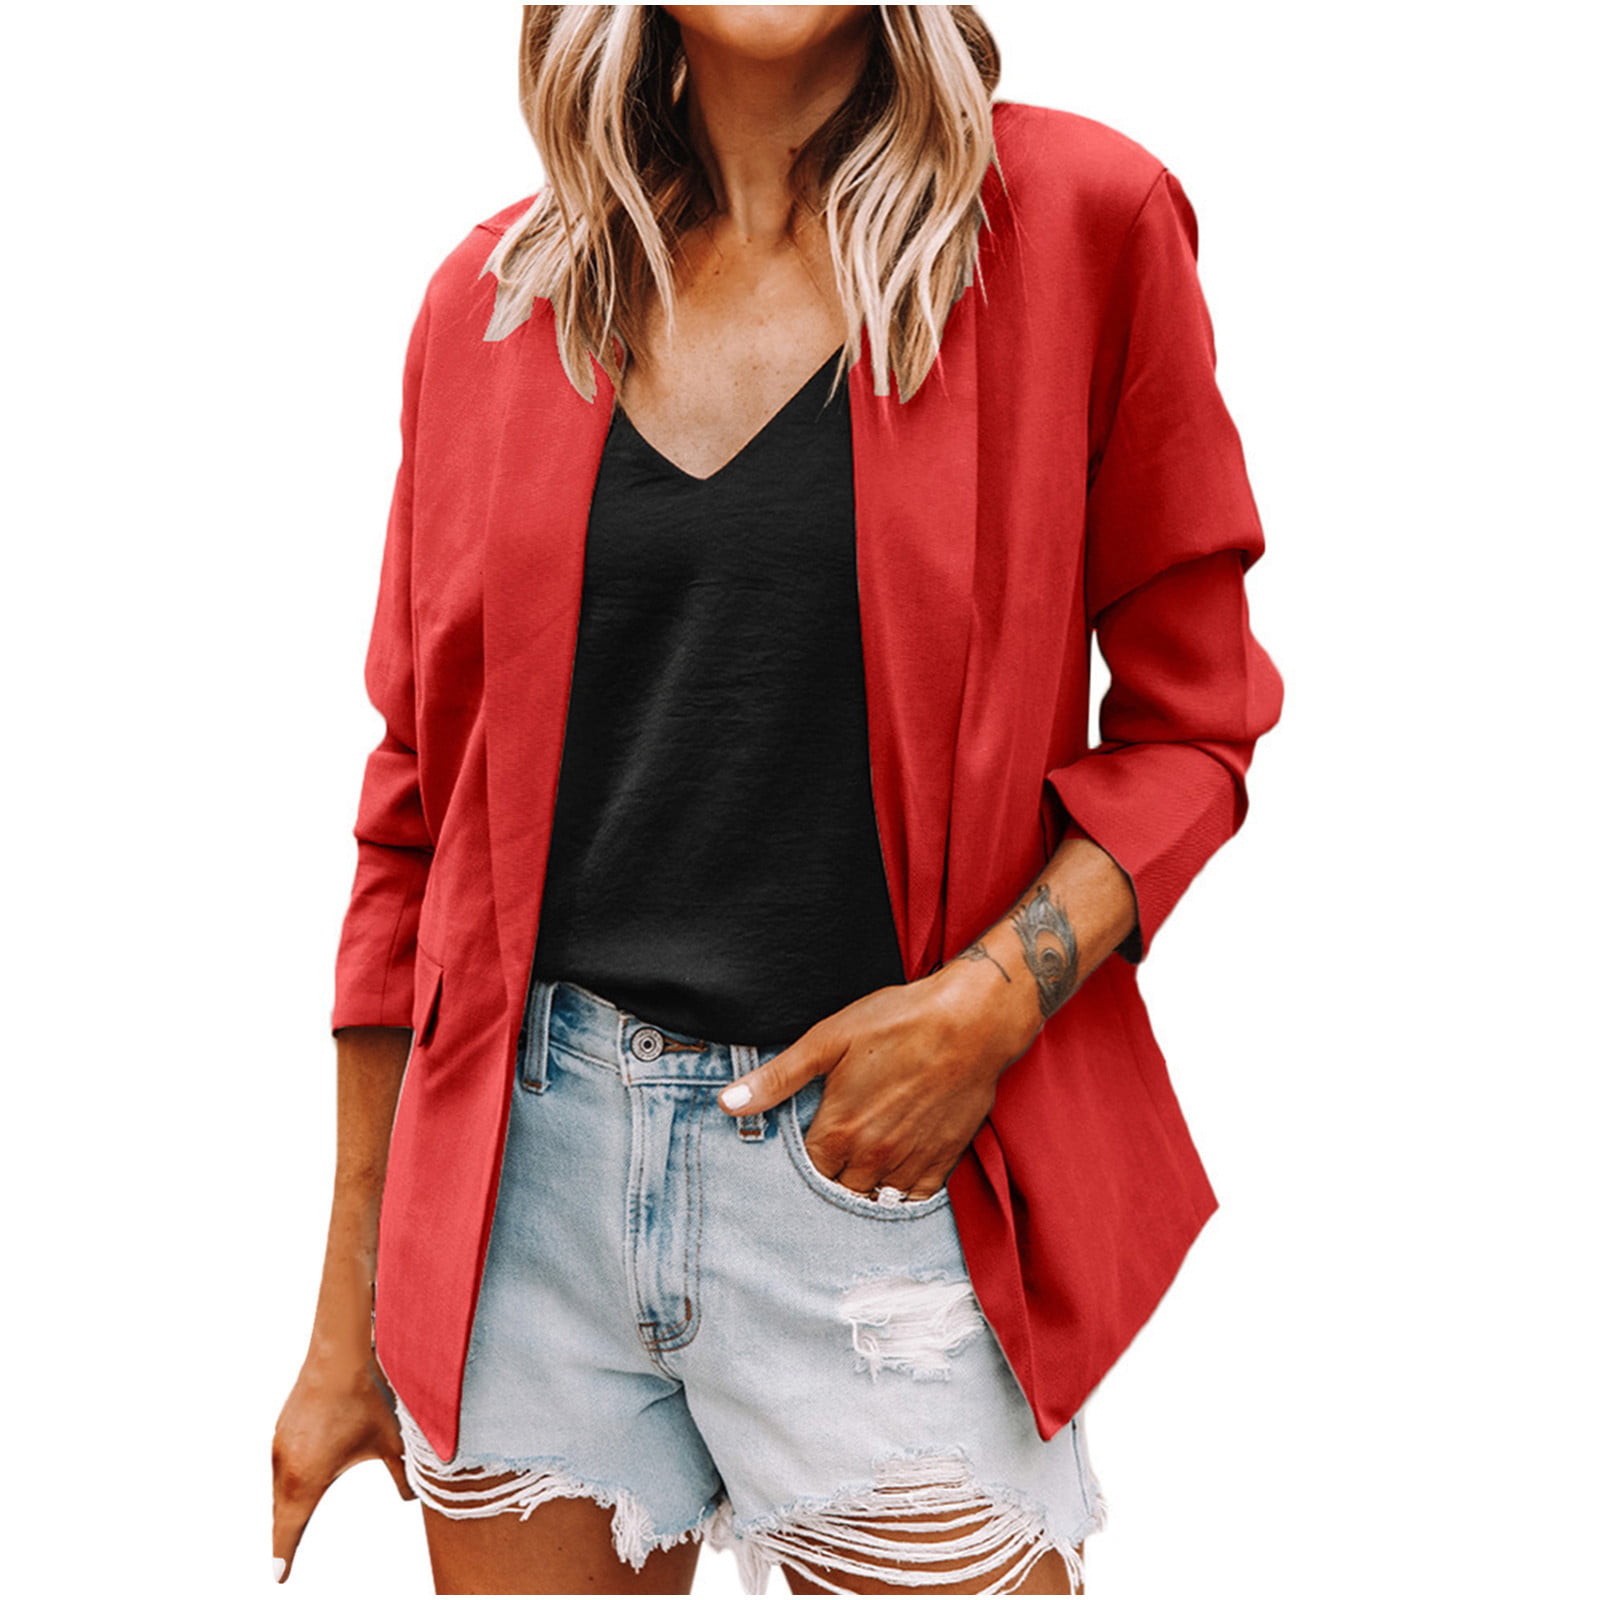 Odeerbi Clearance Blazer Jackets for Women Casual Long Sleeve Solid ...